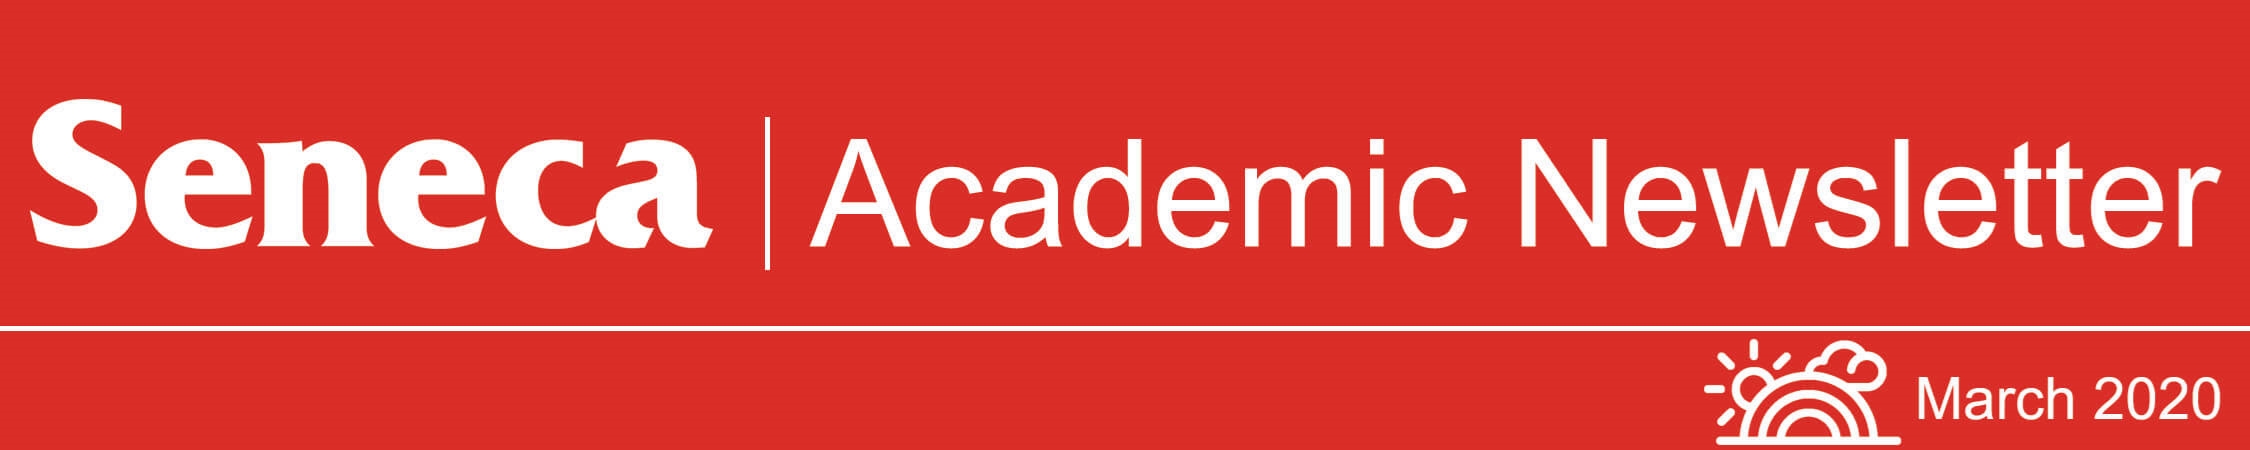 The header logo for the March 2020 issue of the Academic Newsletter